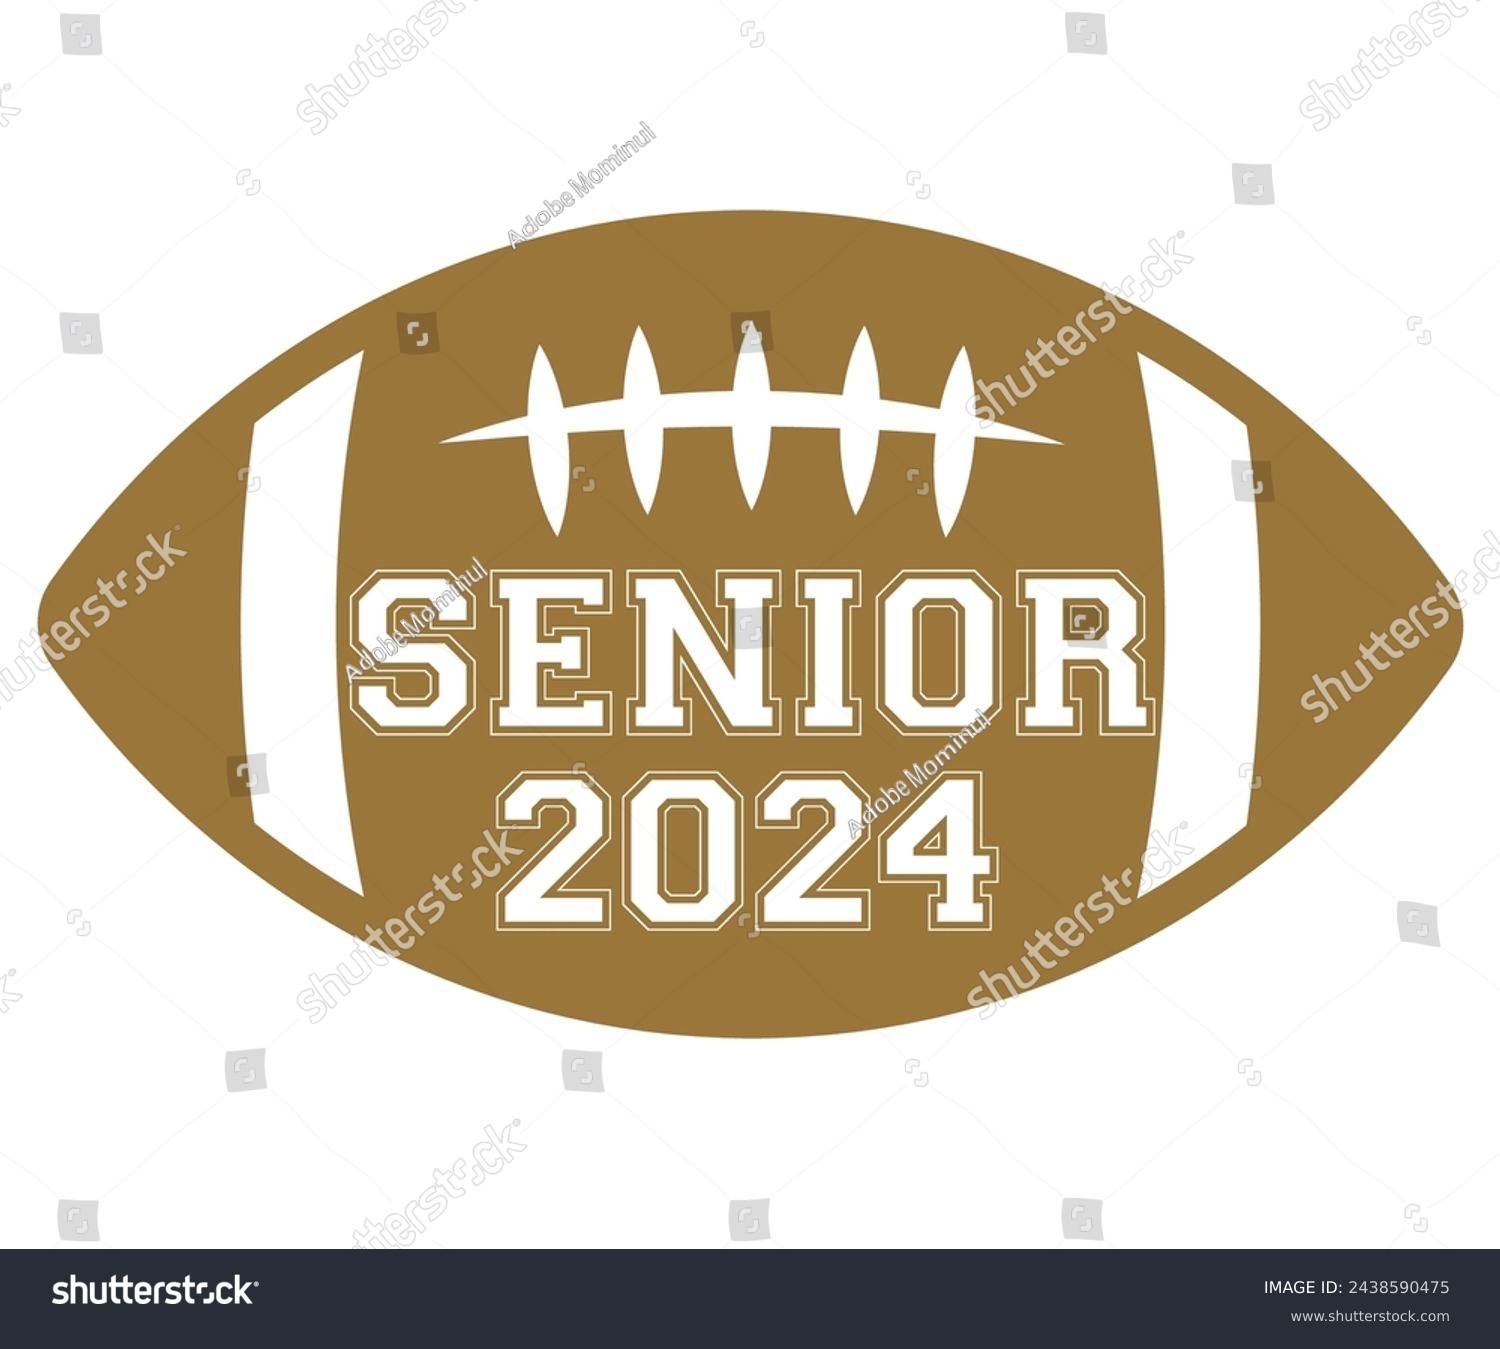 SVG of 2024 Senior Football,Football Svg,Football Player Svg,Game Day Shirt,Football Quotes Svg,American Football Svg,Soccer Svg,Cut File,Commercial use svg